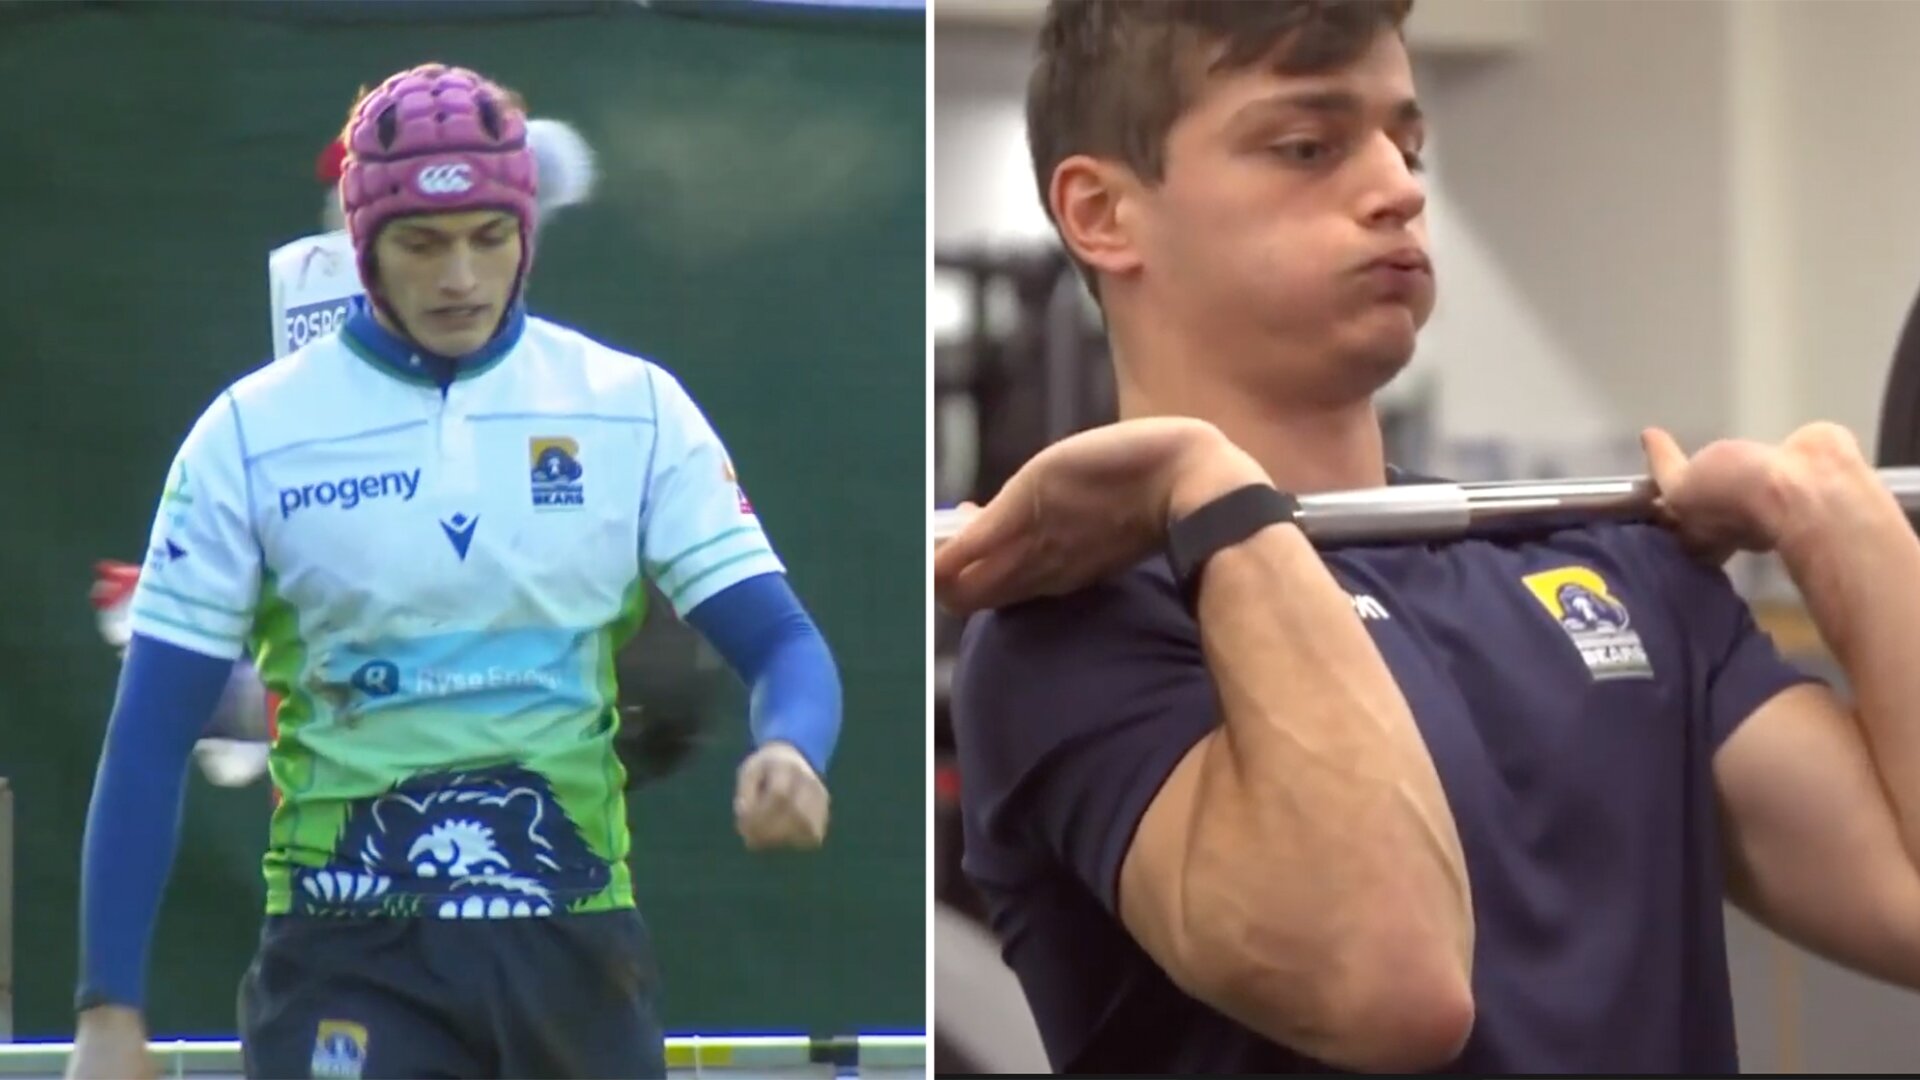 A young rugby player from Czech Republic is tearing up rugby in Scotland